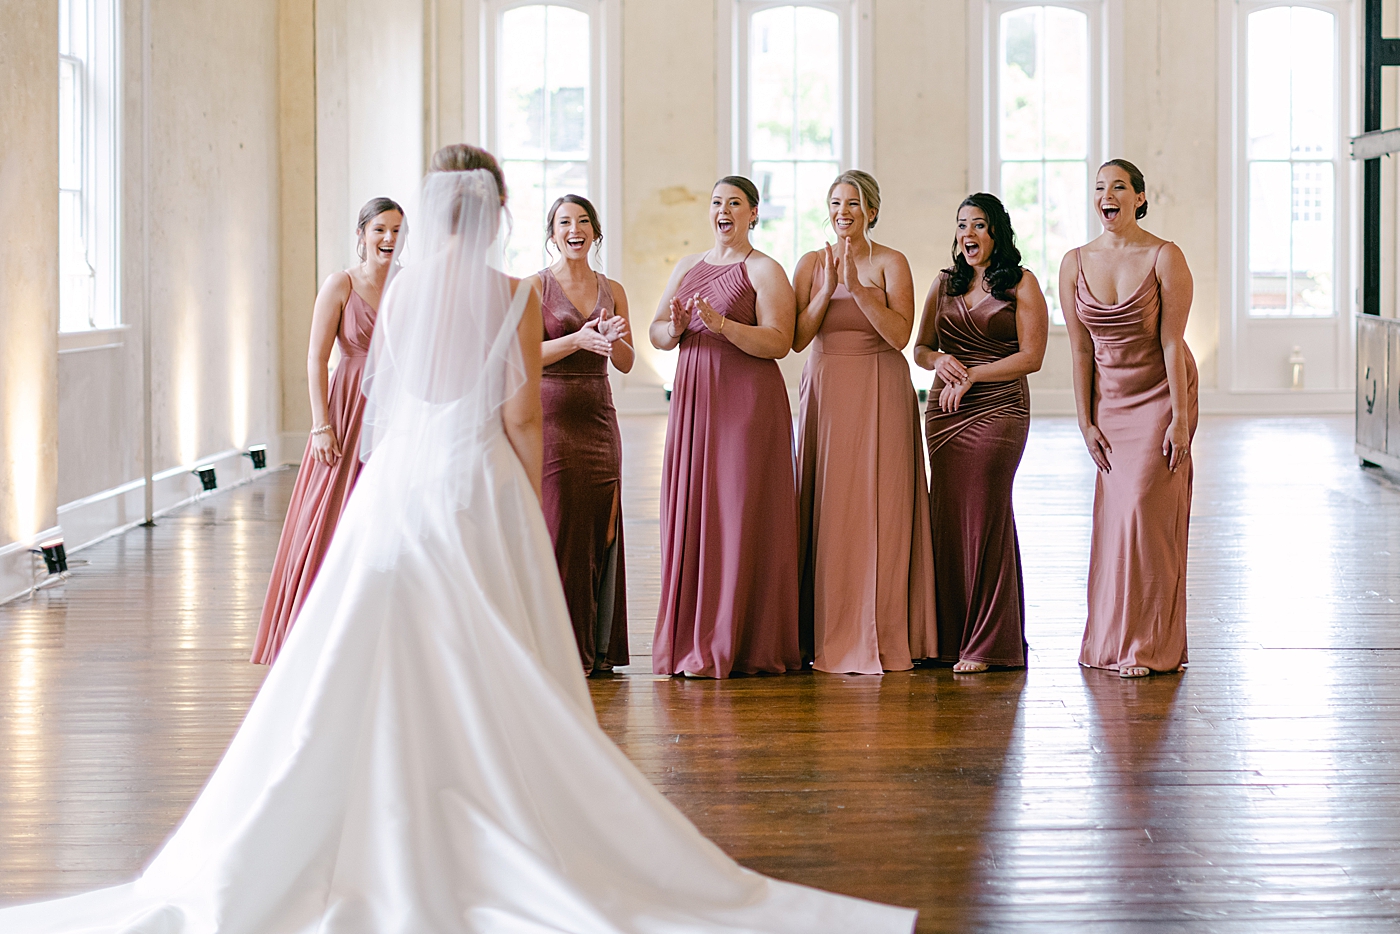 Bridesmaids seeing bride for the first time | Photo by Hope Helmuth Photography